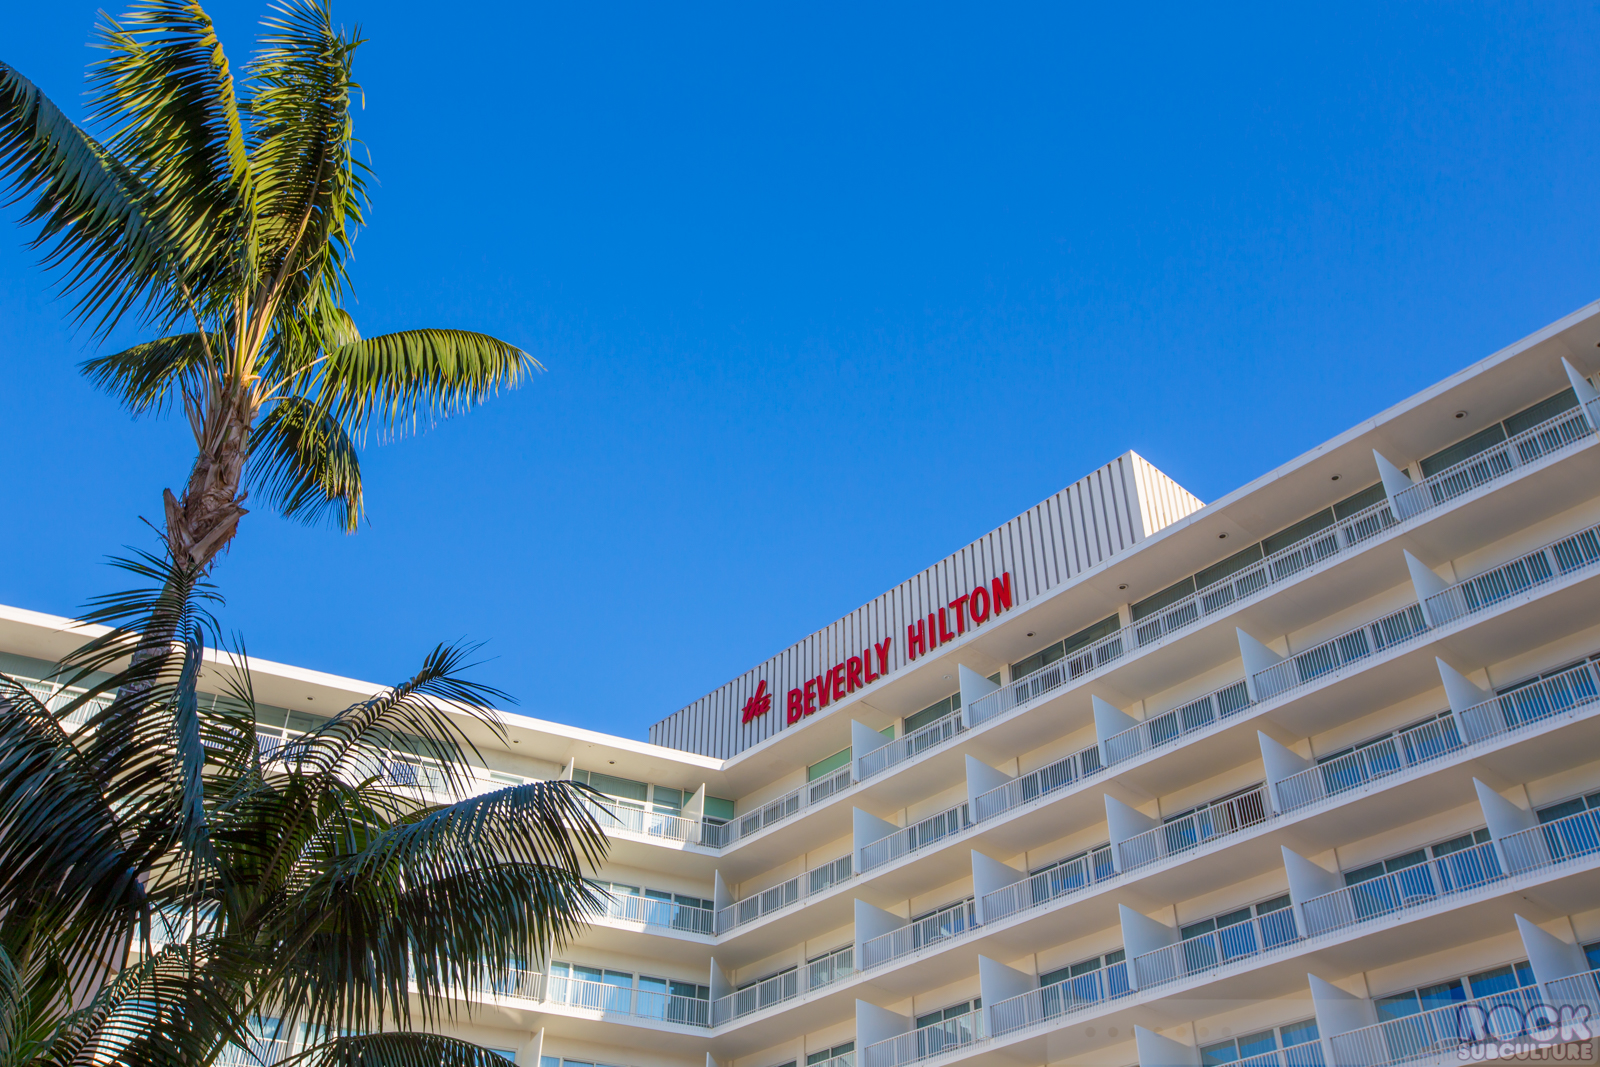 Hotel/Resort Review: The Beverly Hilton – Beverly Hills